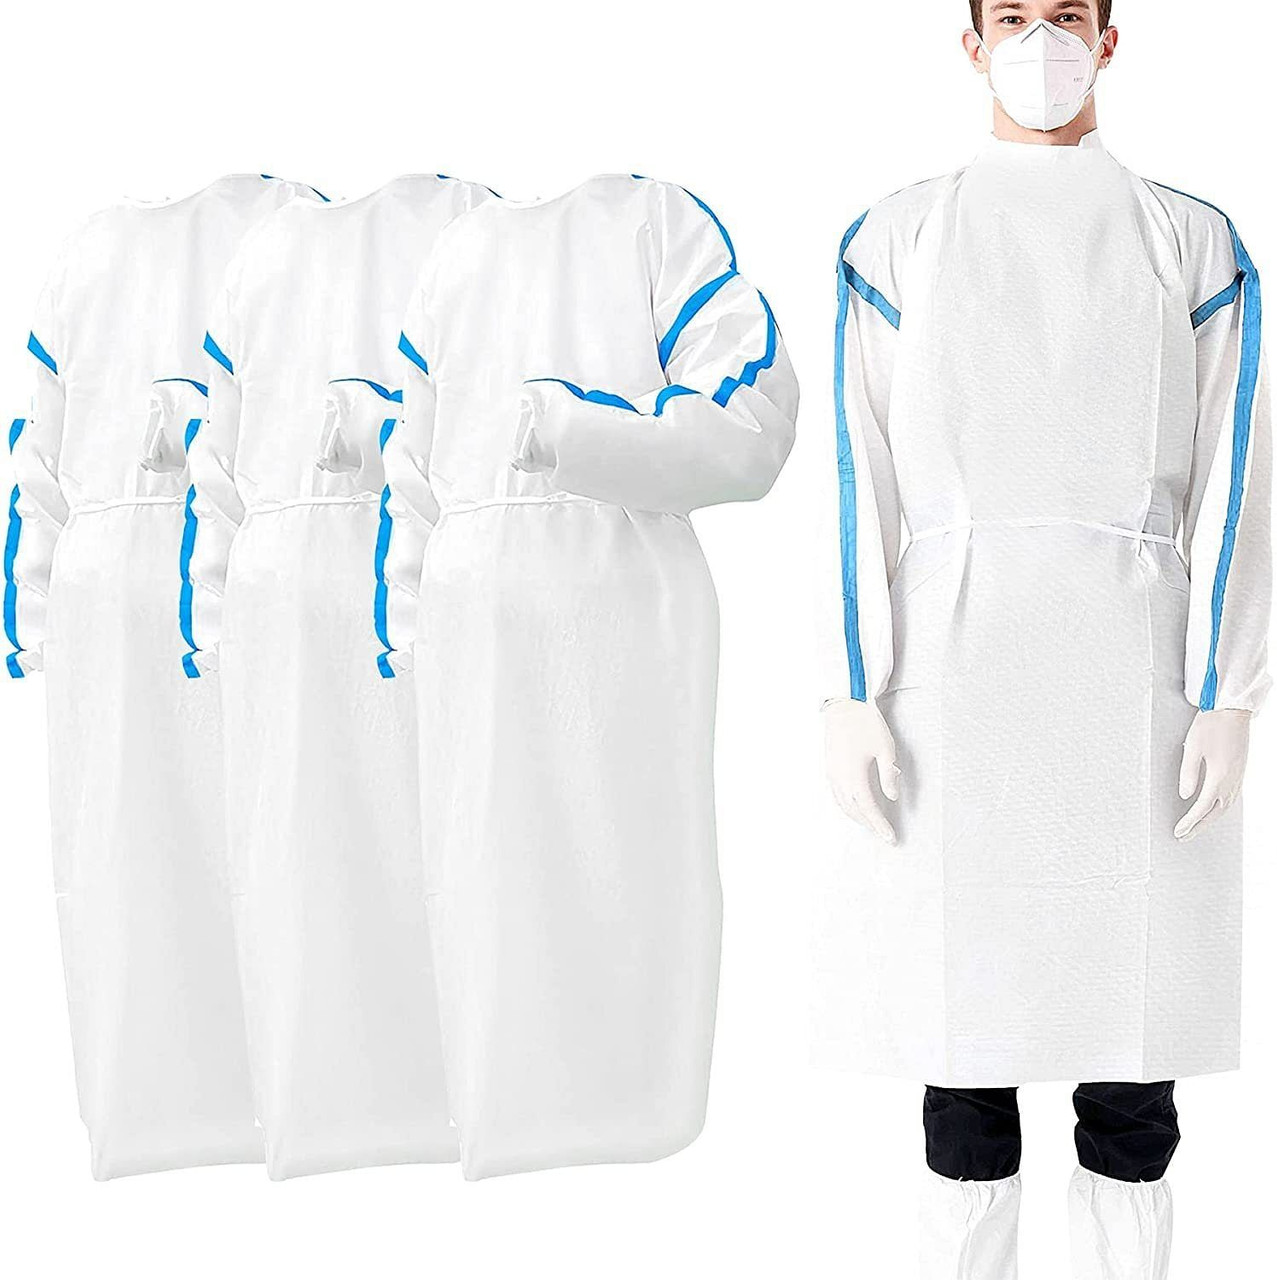 Disposable Gowns X-Large. Pack of 25 White Isolation Gowns. 50 gsm Microporous Surgical Gowns with 